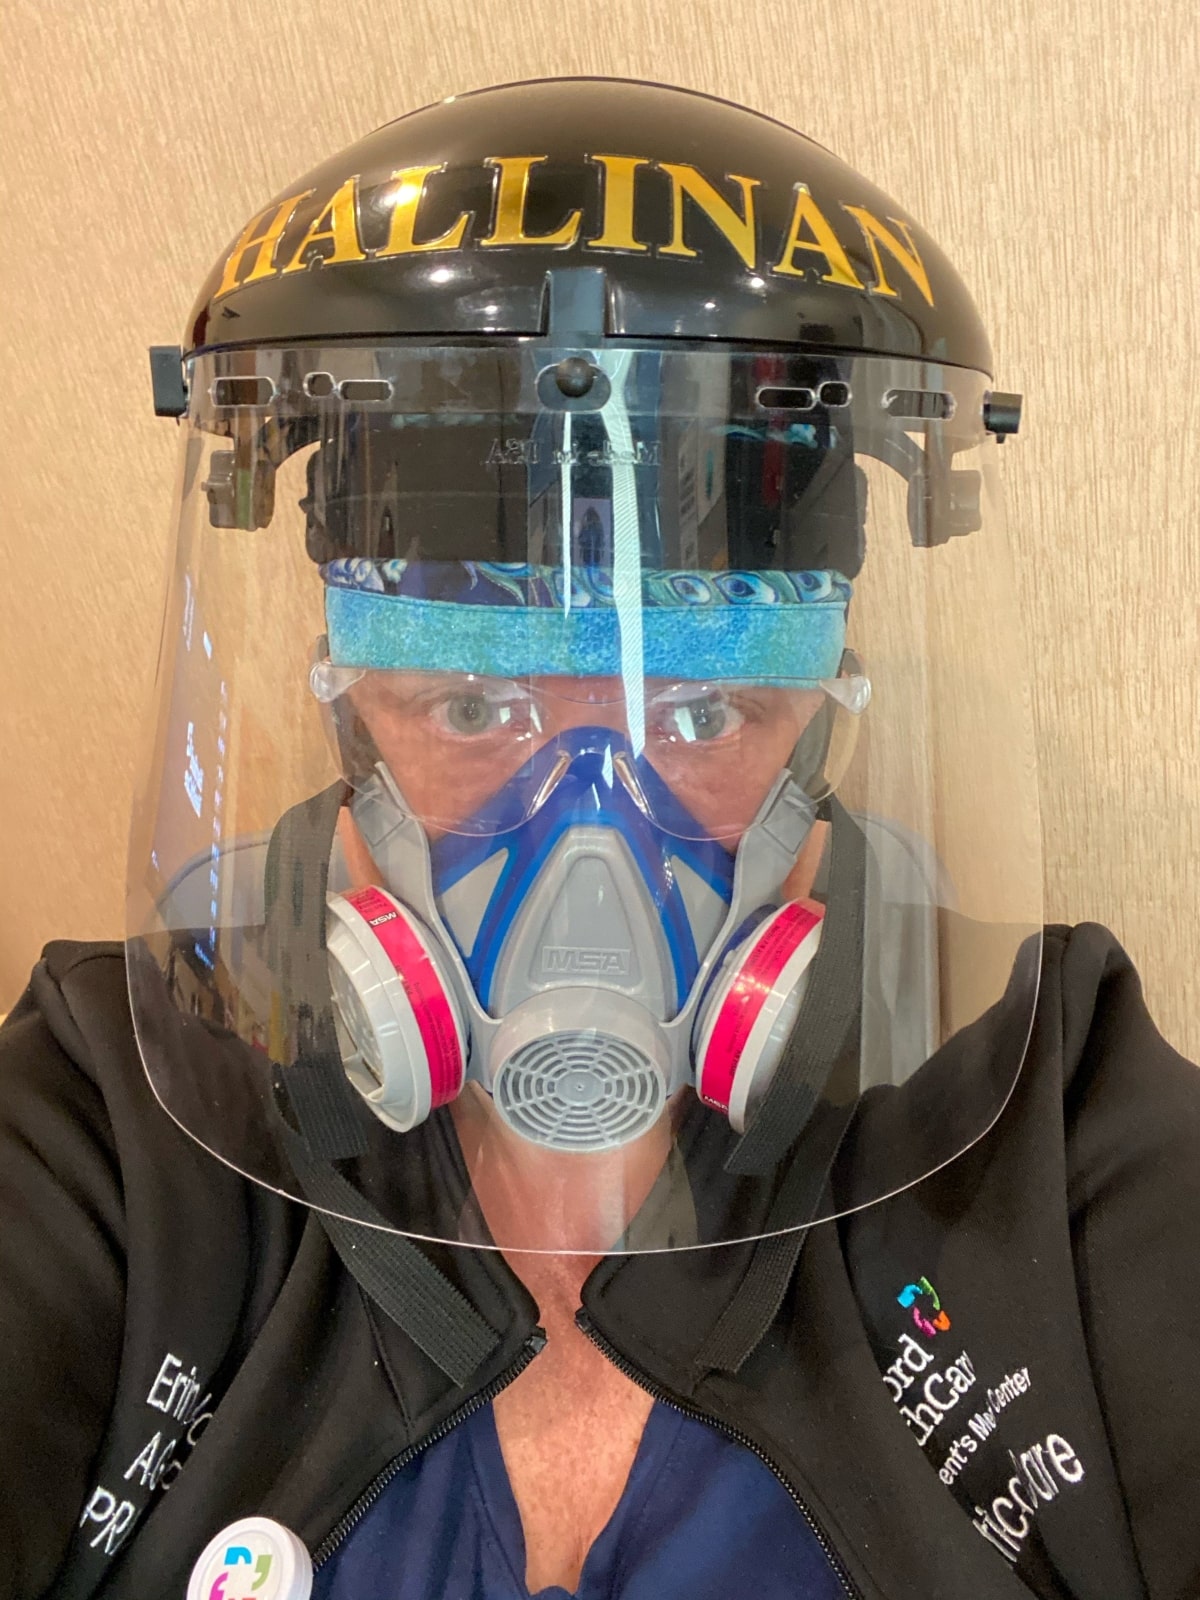 Behind the Mask of a Critical Care Nurse Practitioner During COVID-19